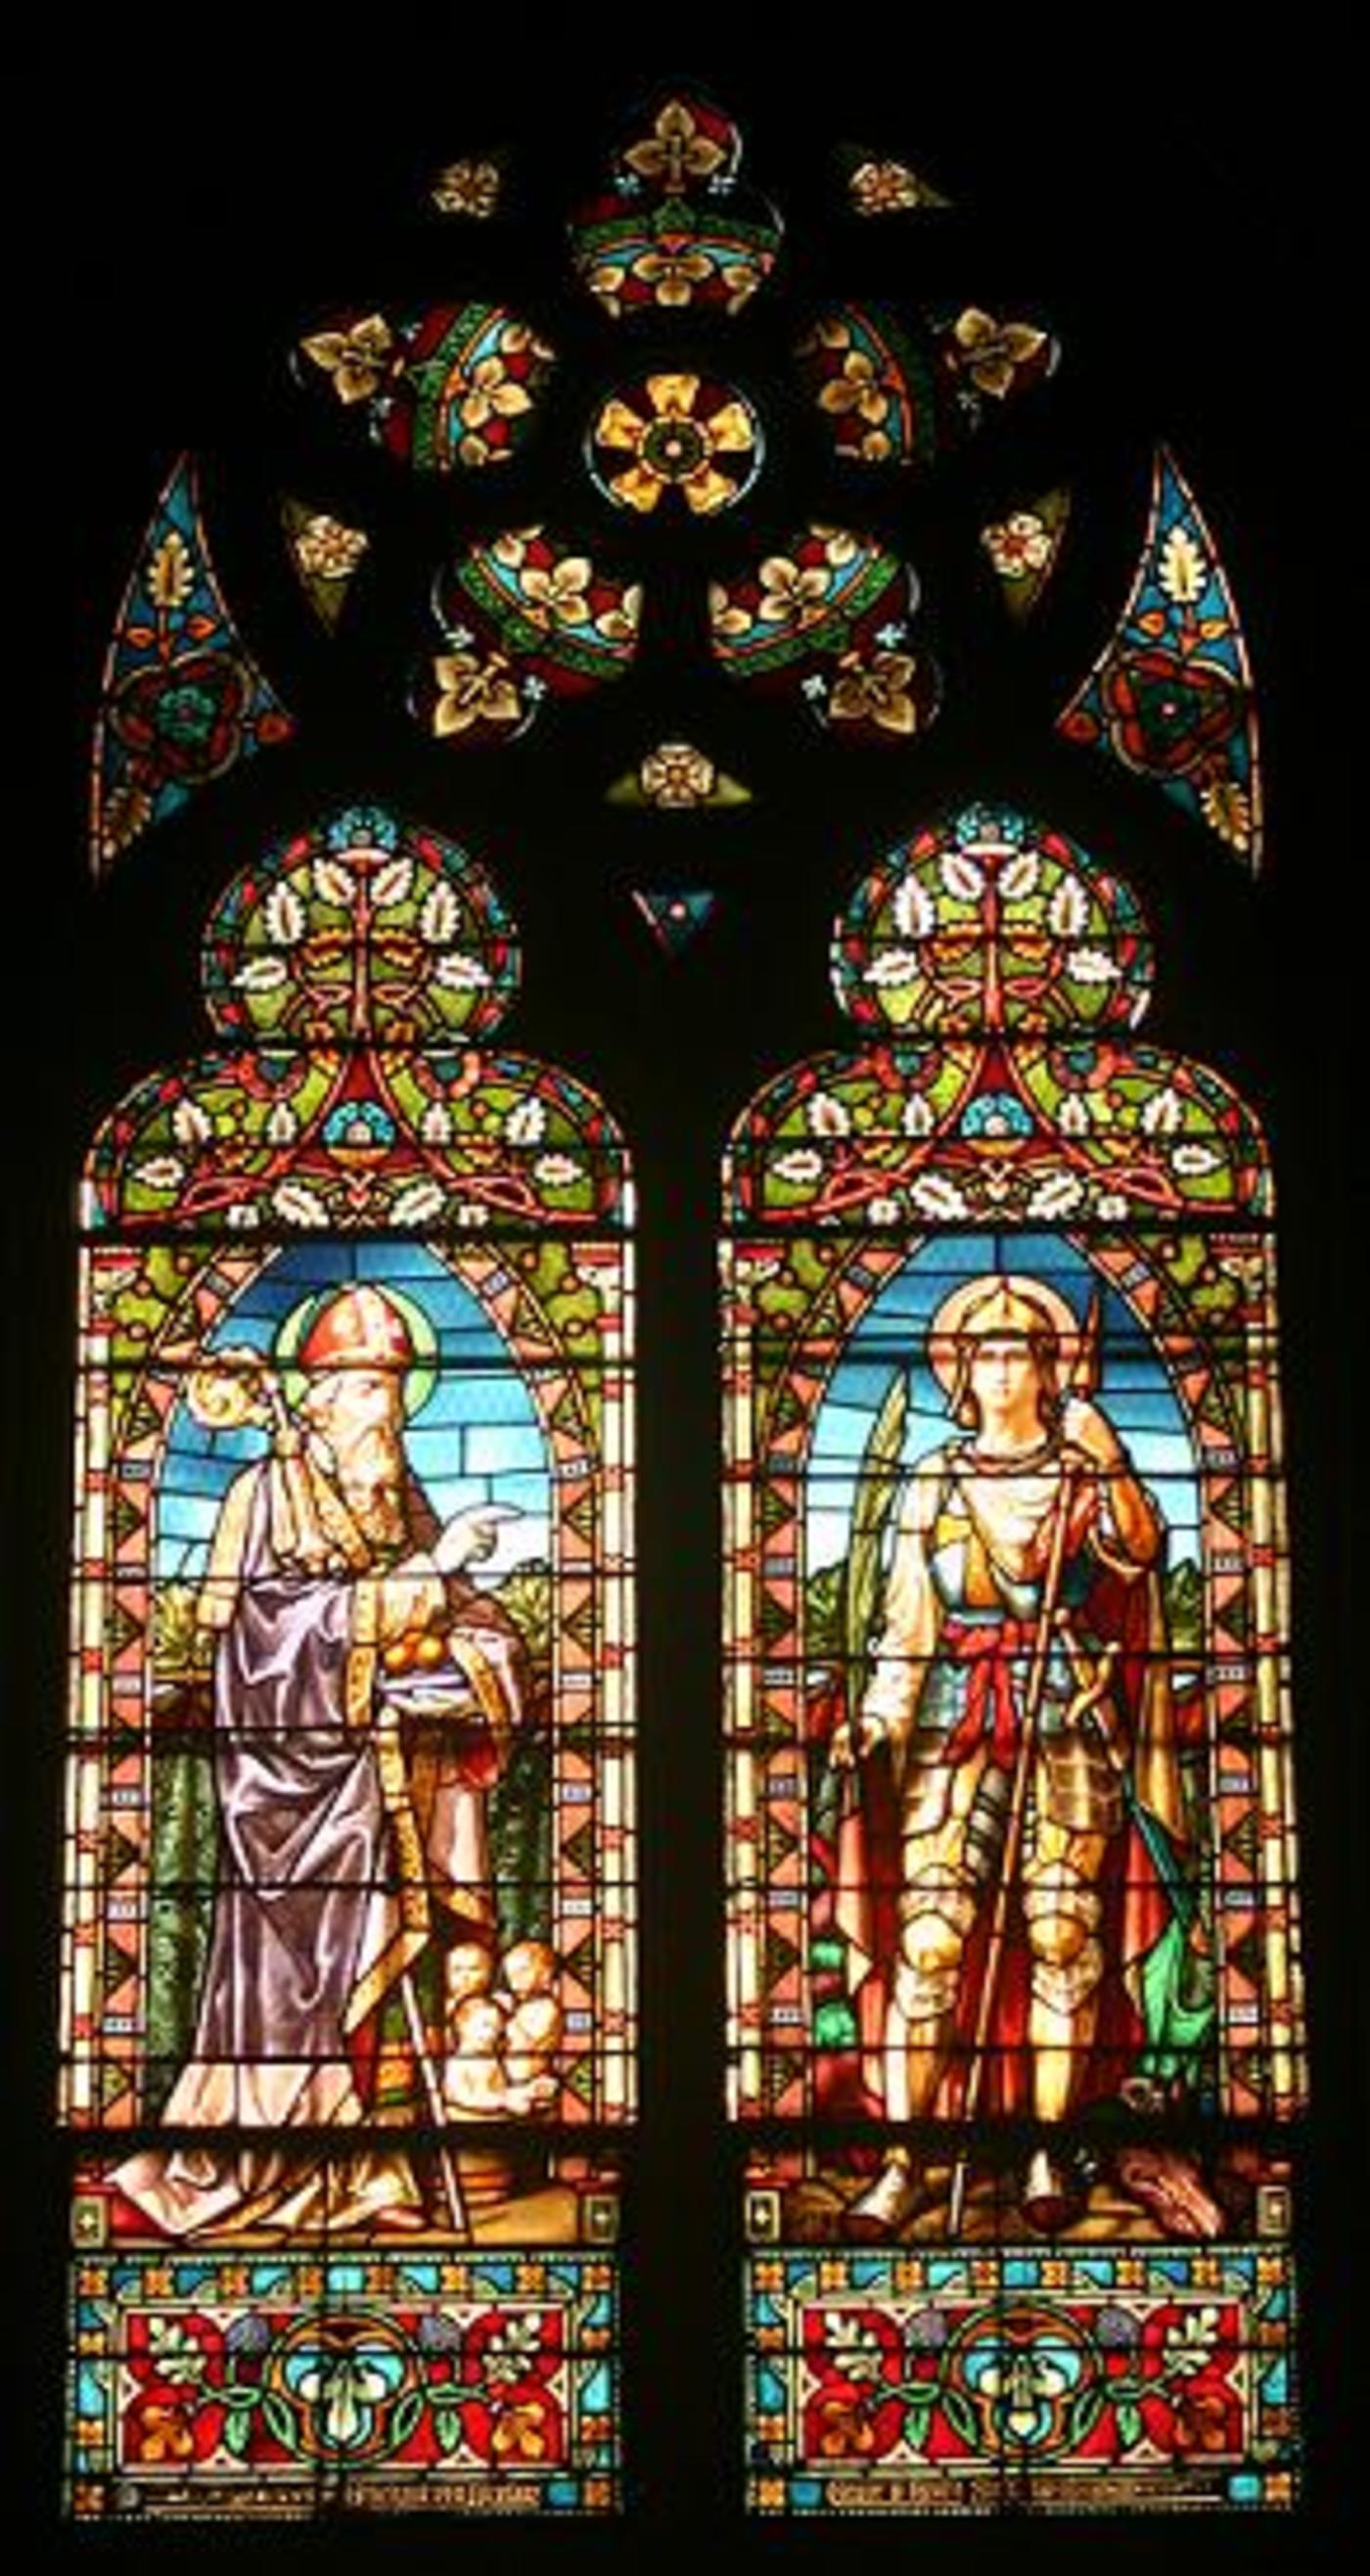 Windows 11A and11B St. Nicholas of Myra and St. George the Martyr